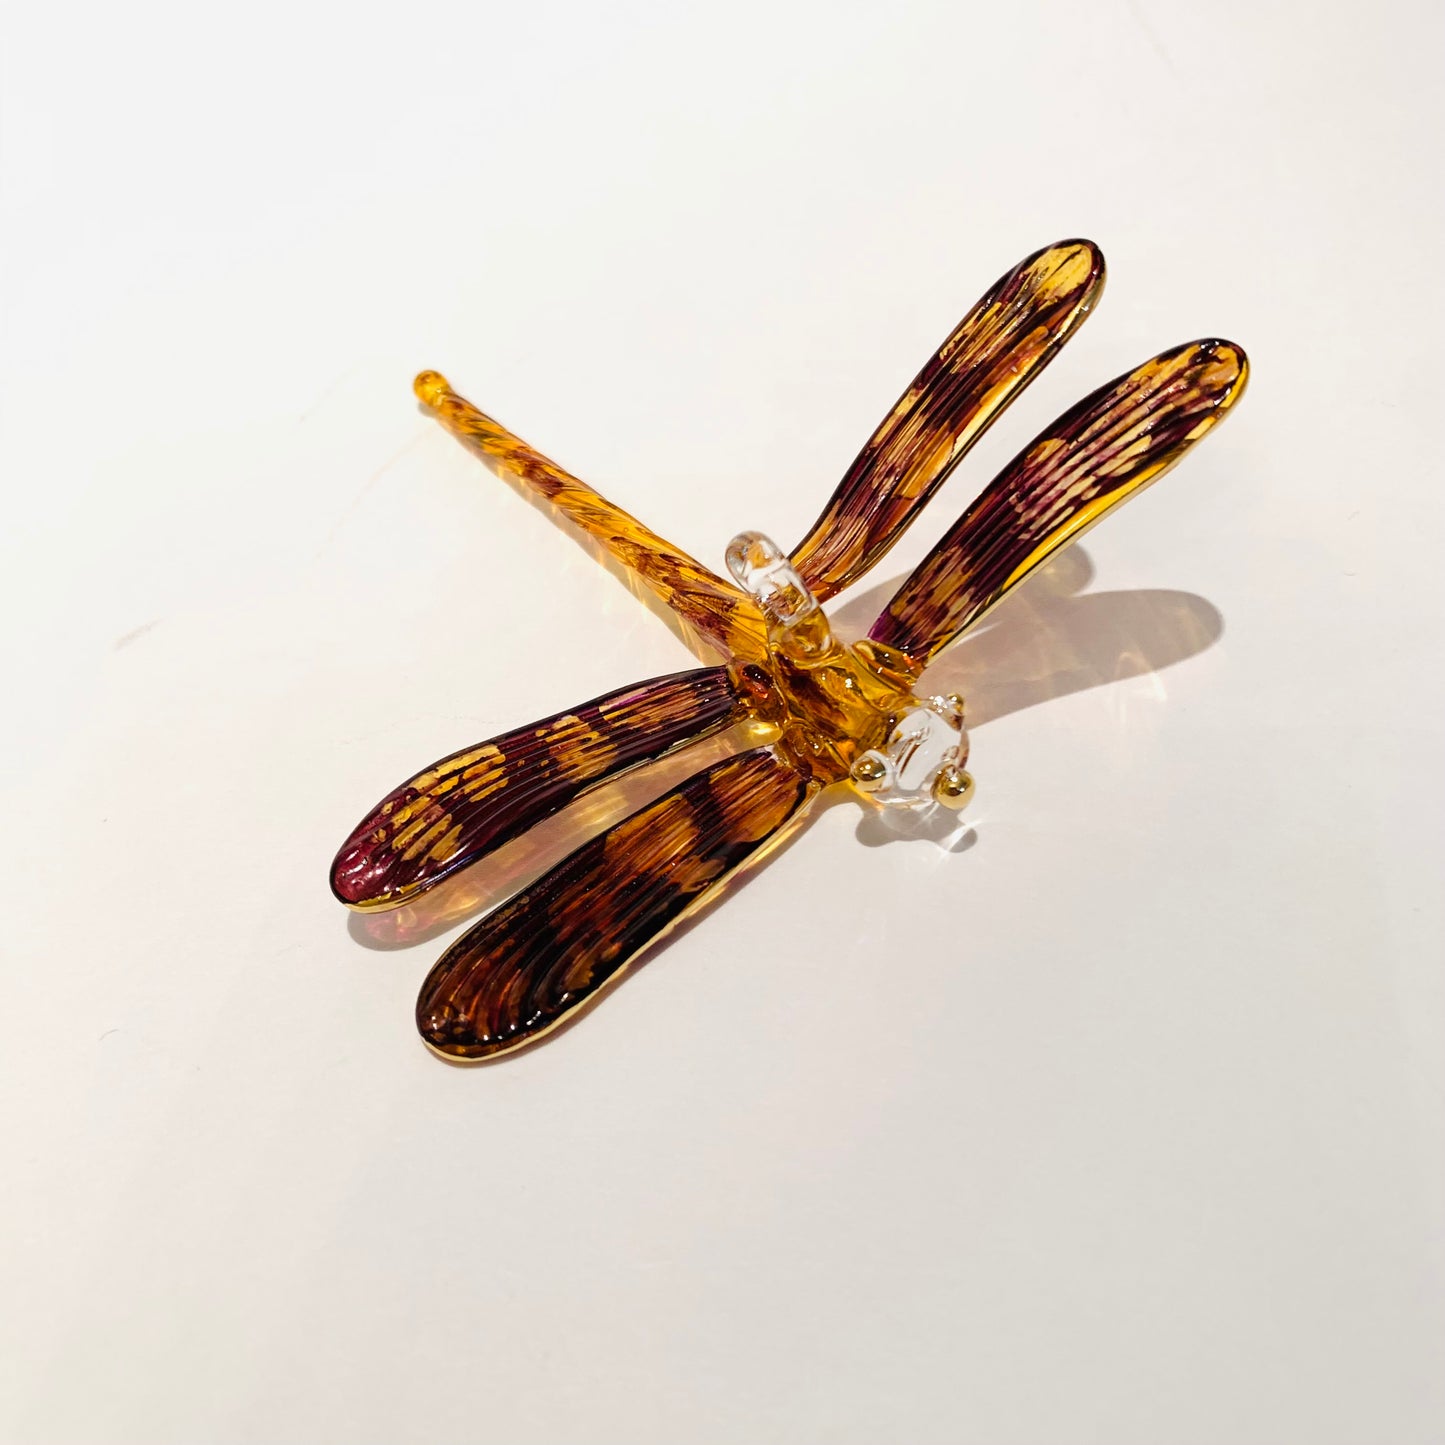 Blown Glass Ornament - Dragonfly Yellow & Brown Variegated